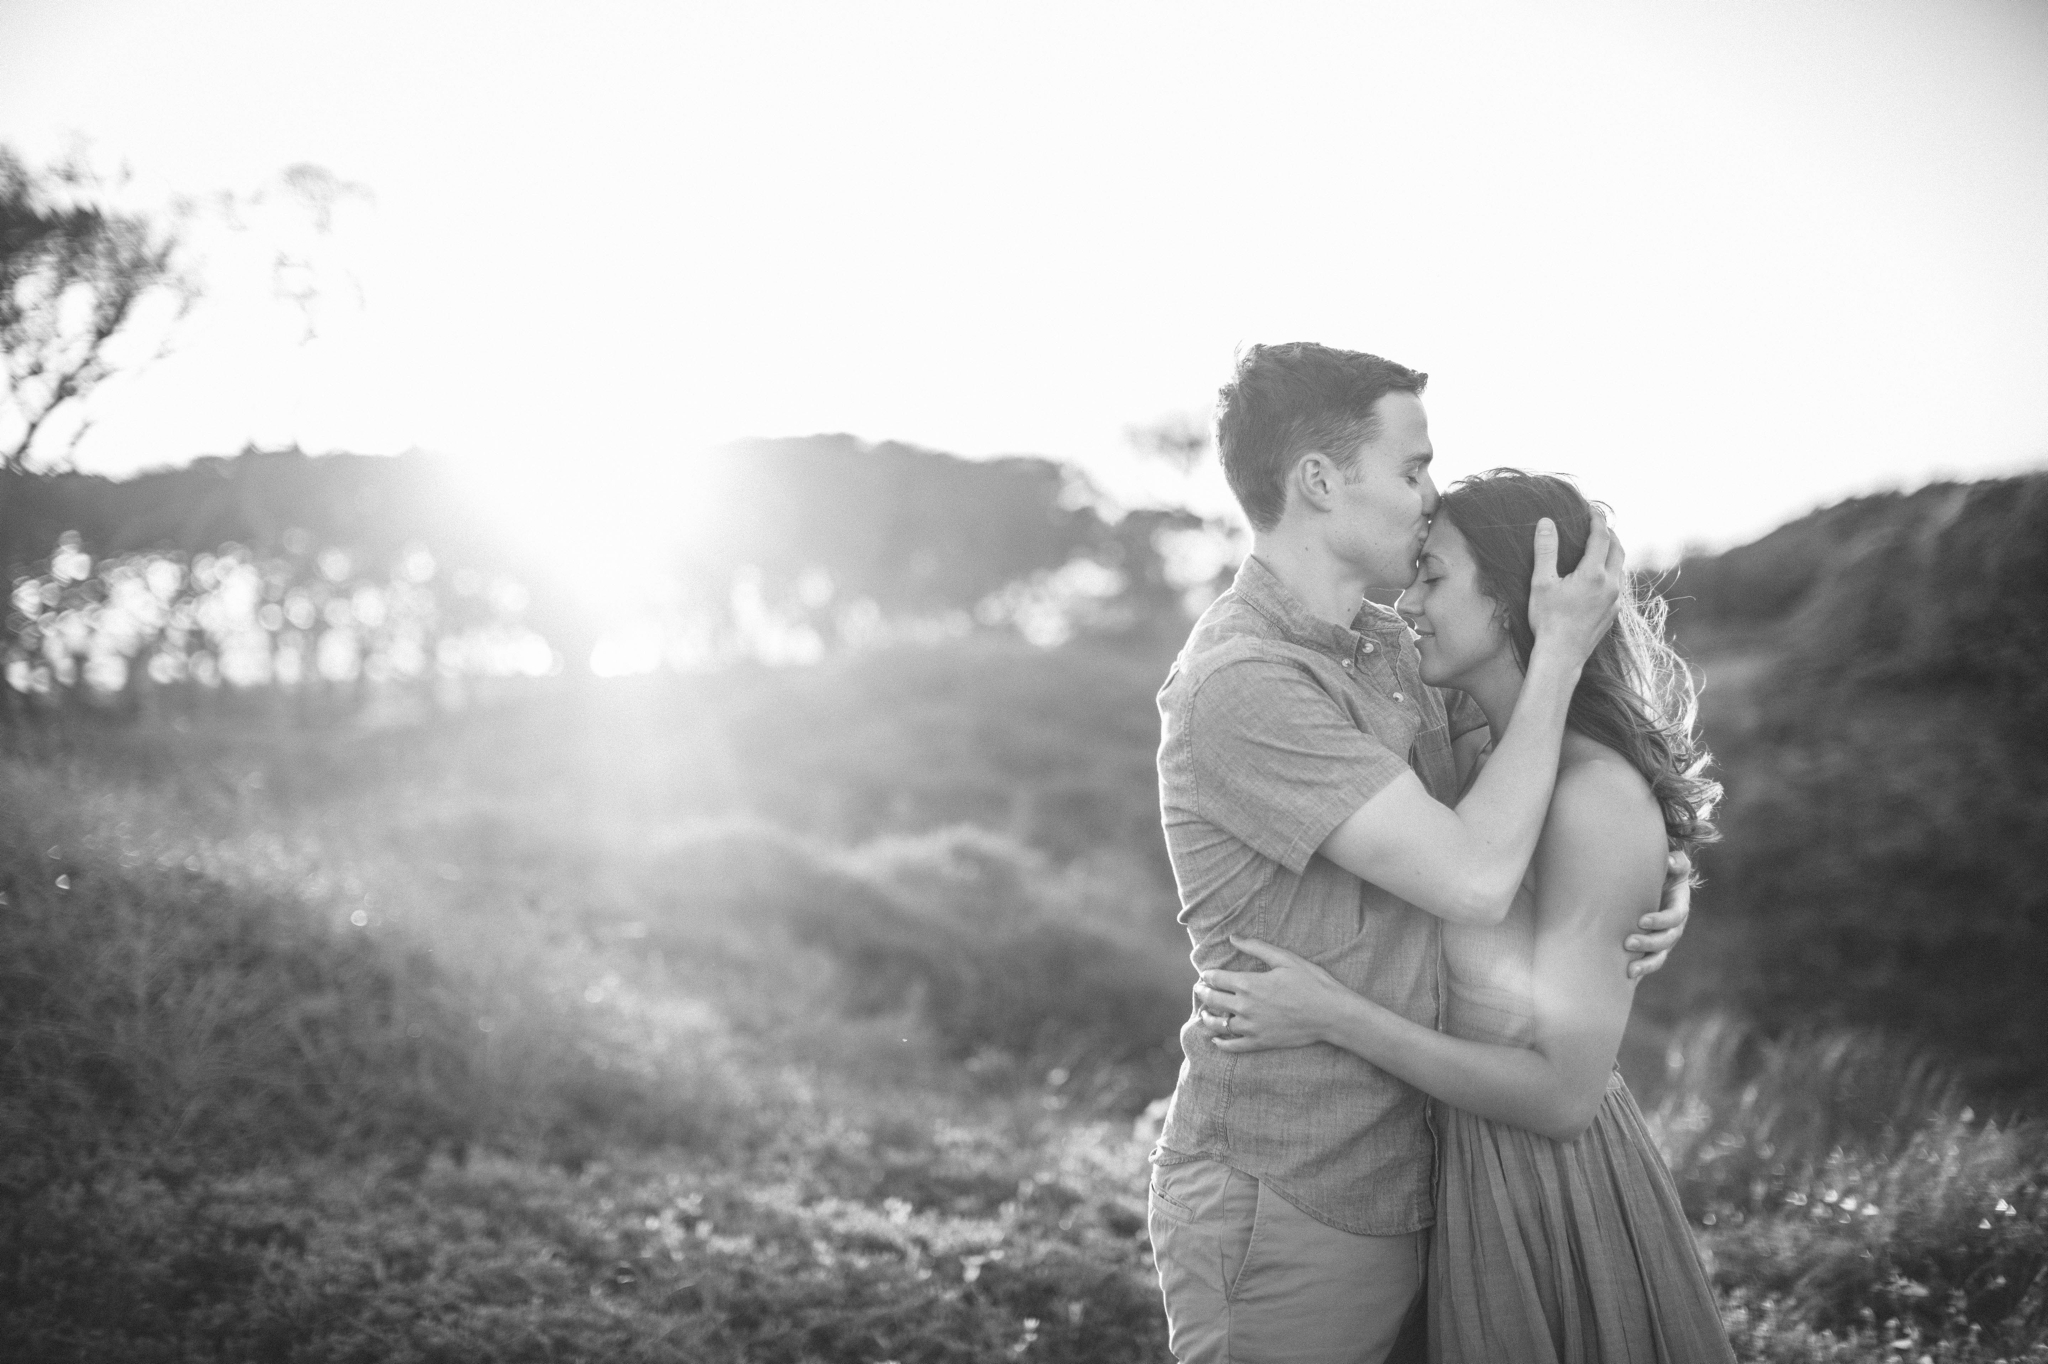  couple looking at each other while his hand is in her hair wile he is kissing her on the forehead- in front of lush green dunes and hills with the sunset behind them - Woman is in a flowy pastel maxi dress - outdoor golden light session - engagement